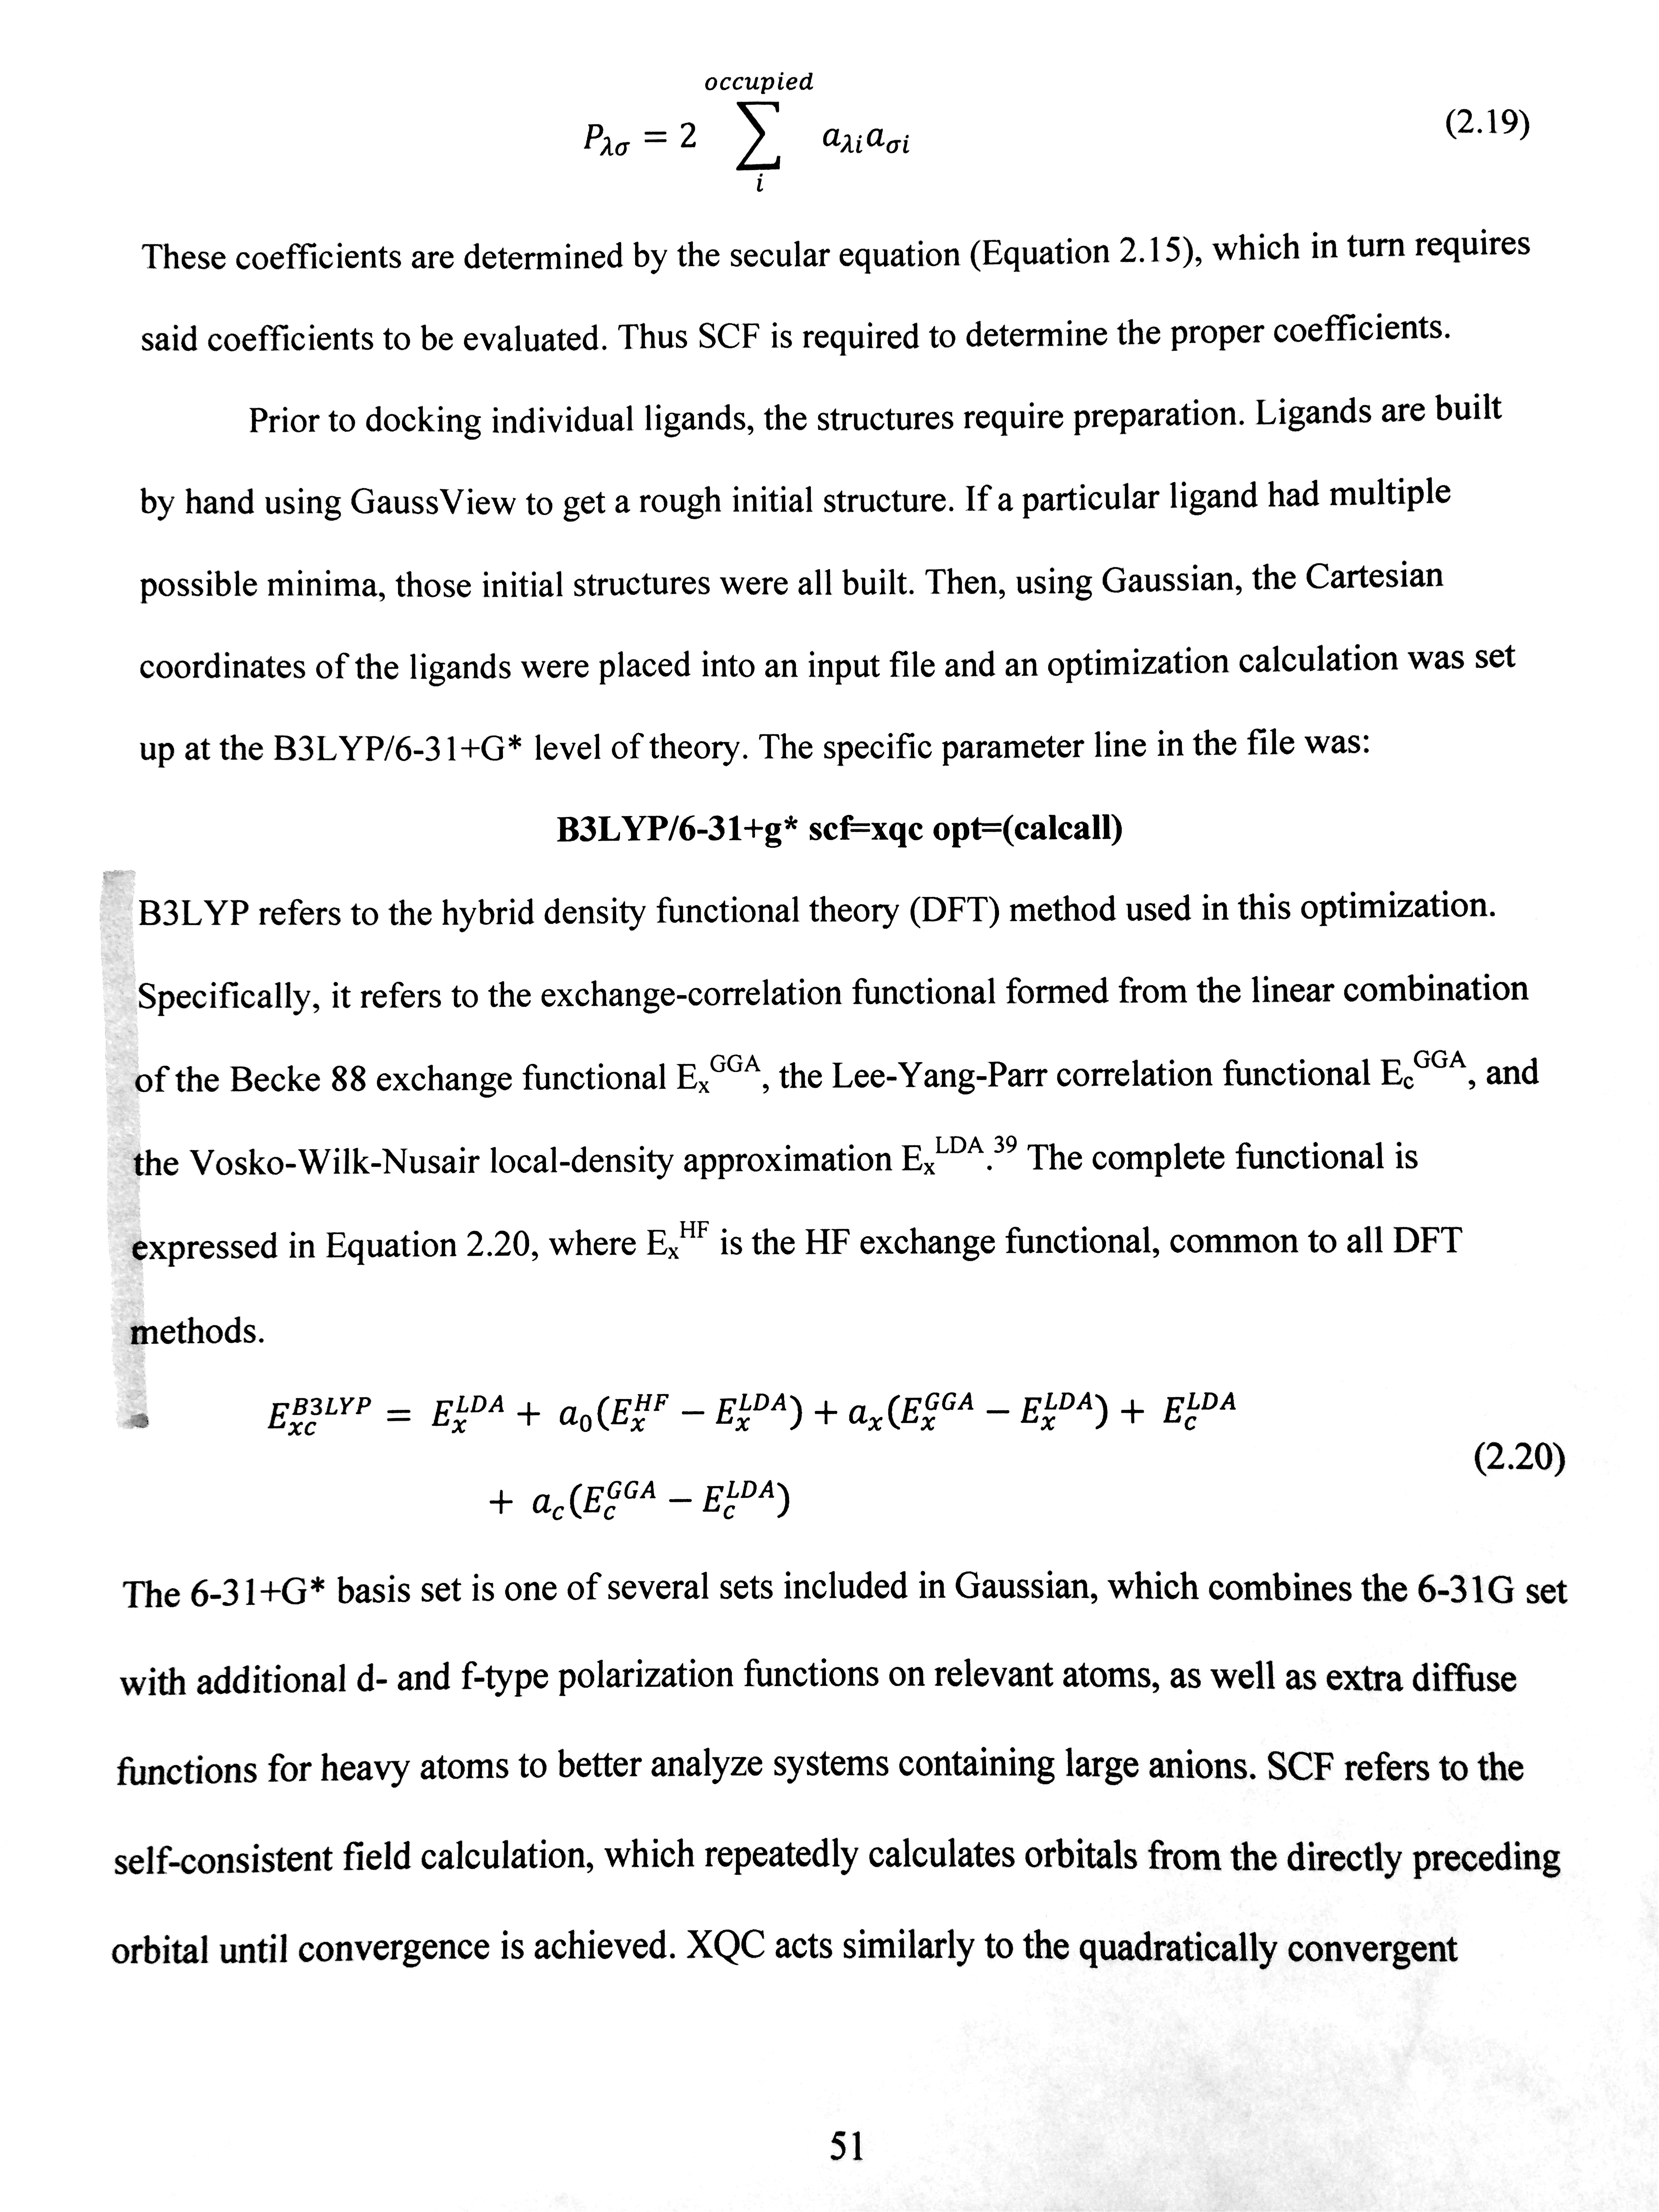 An image of a page of scientific text from Mona Minkara’s Thesis.